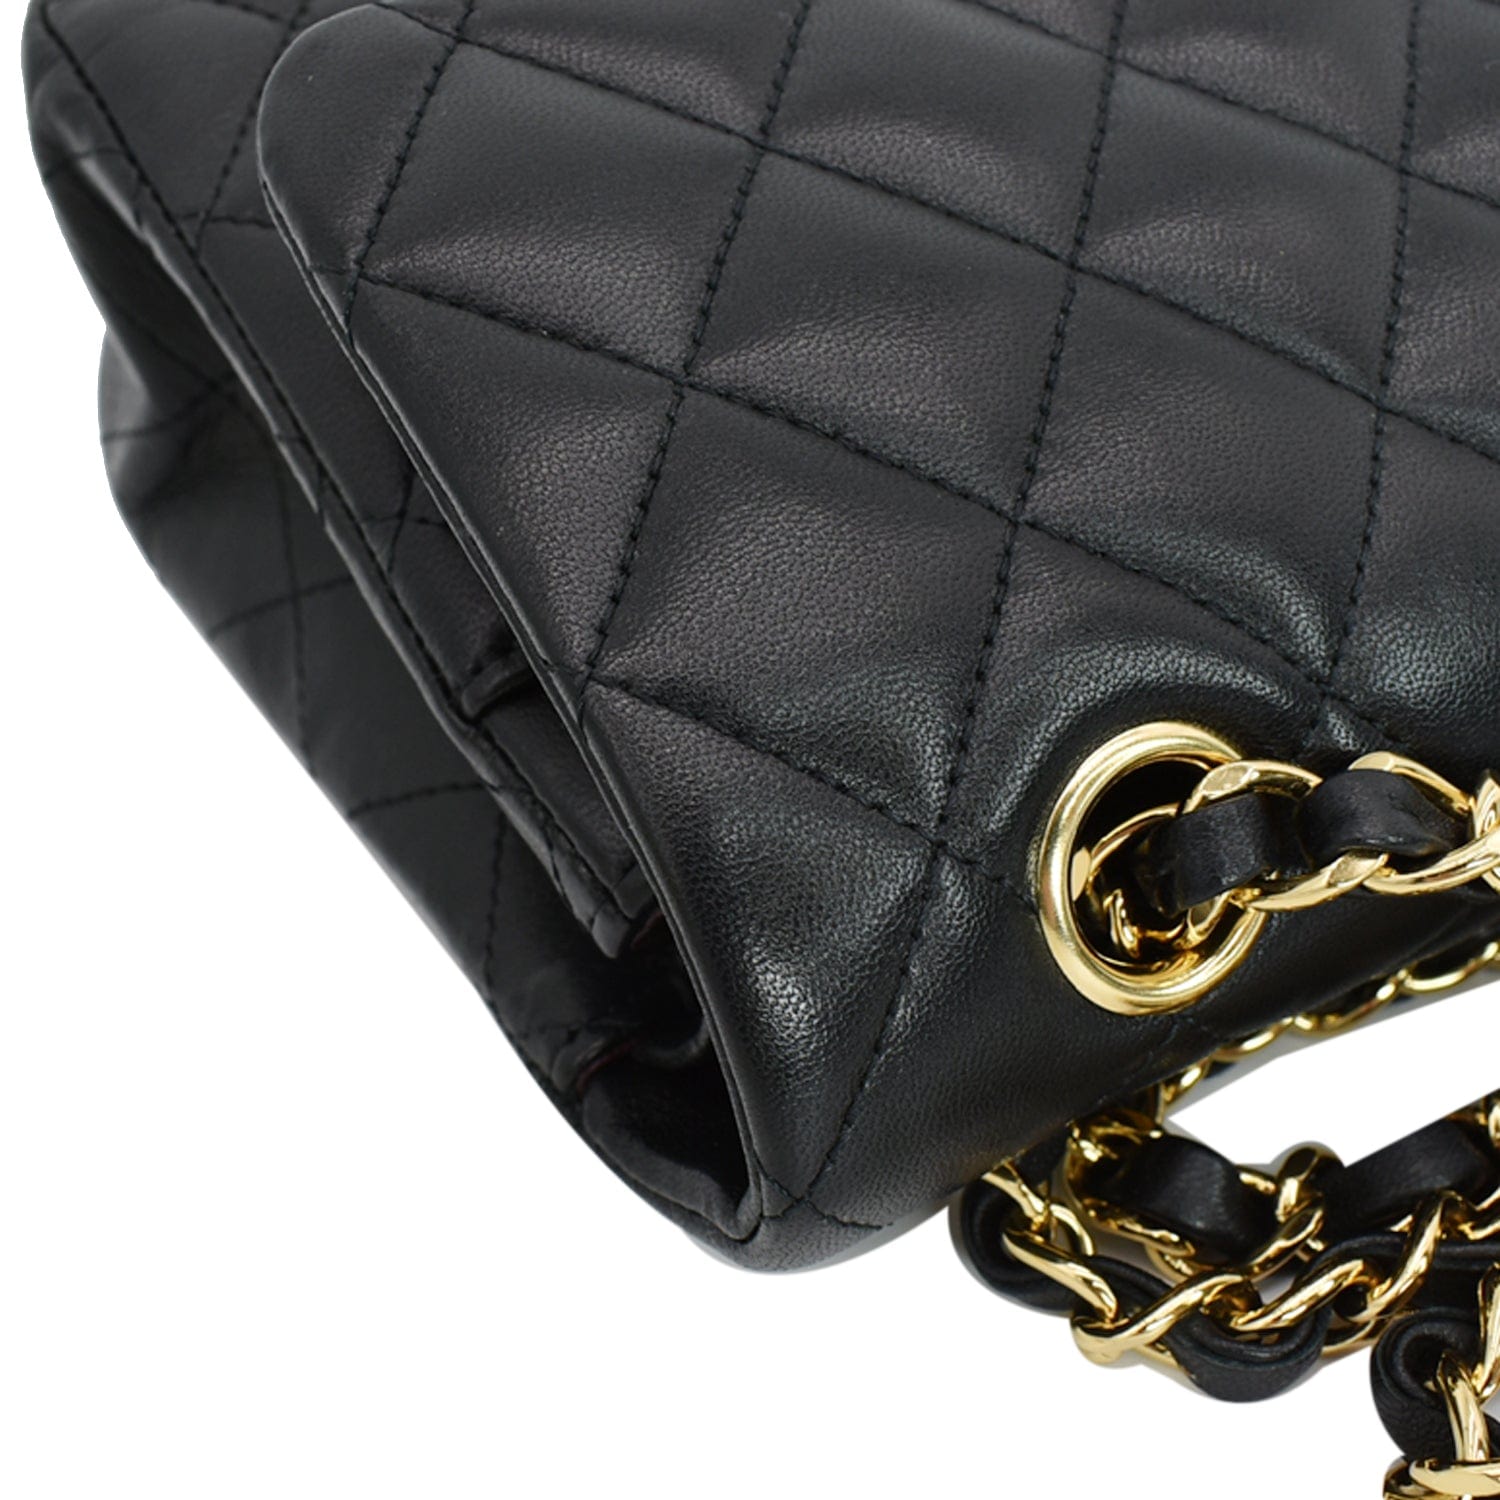 CHANEL Classic Double Flap Small Leather Shoulder Bag Black - Hot Deal